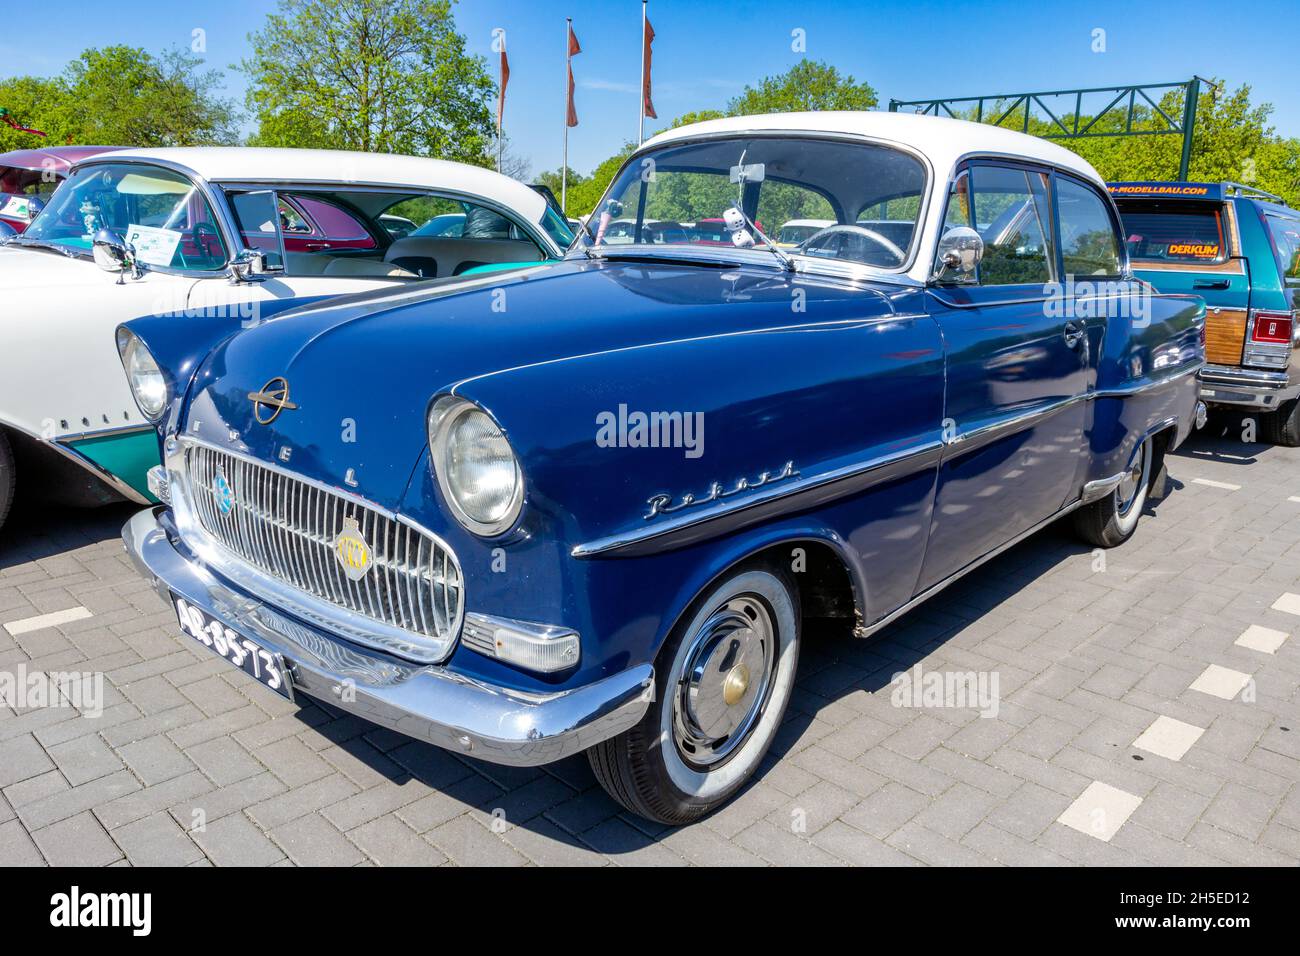 1957 Opel Olympia Rekord classic car on the parking lot. Rosmalen, The Netherlands - May 8, 2016 Stock Photo